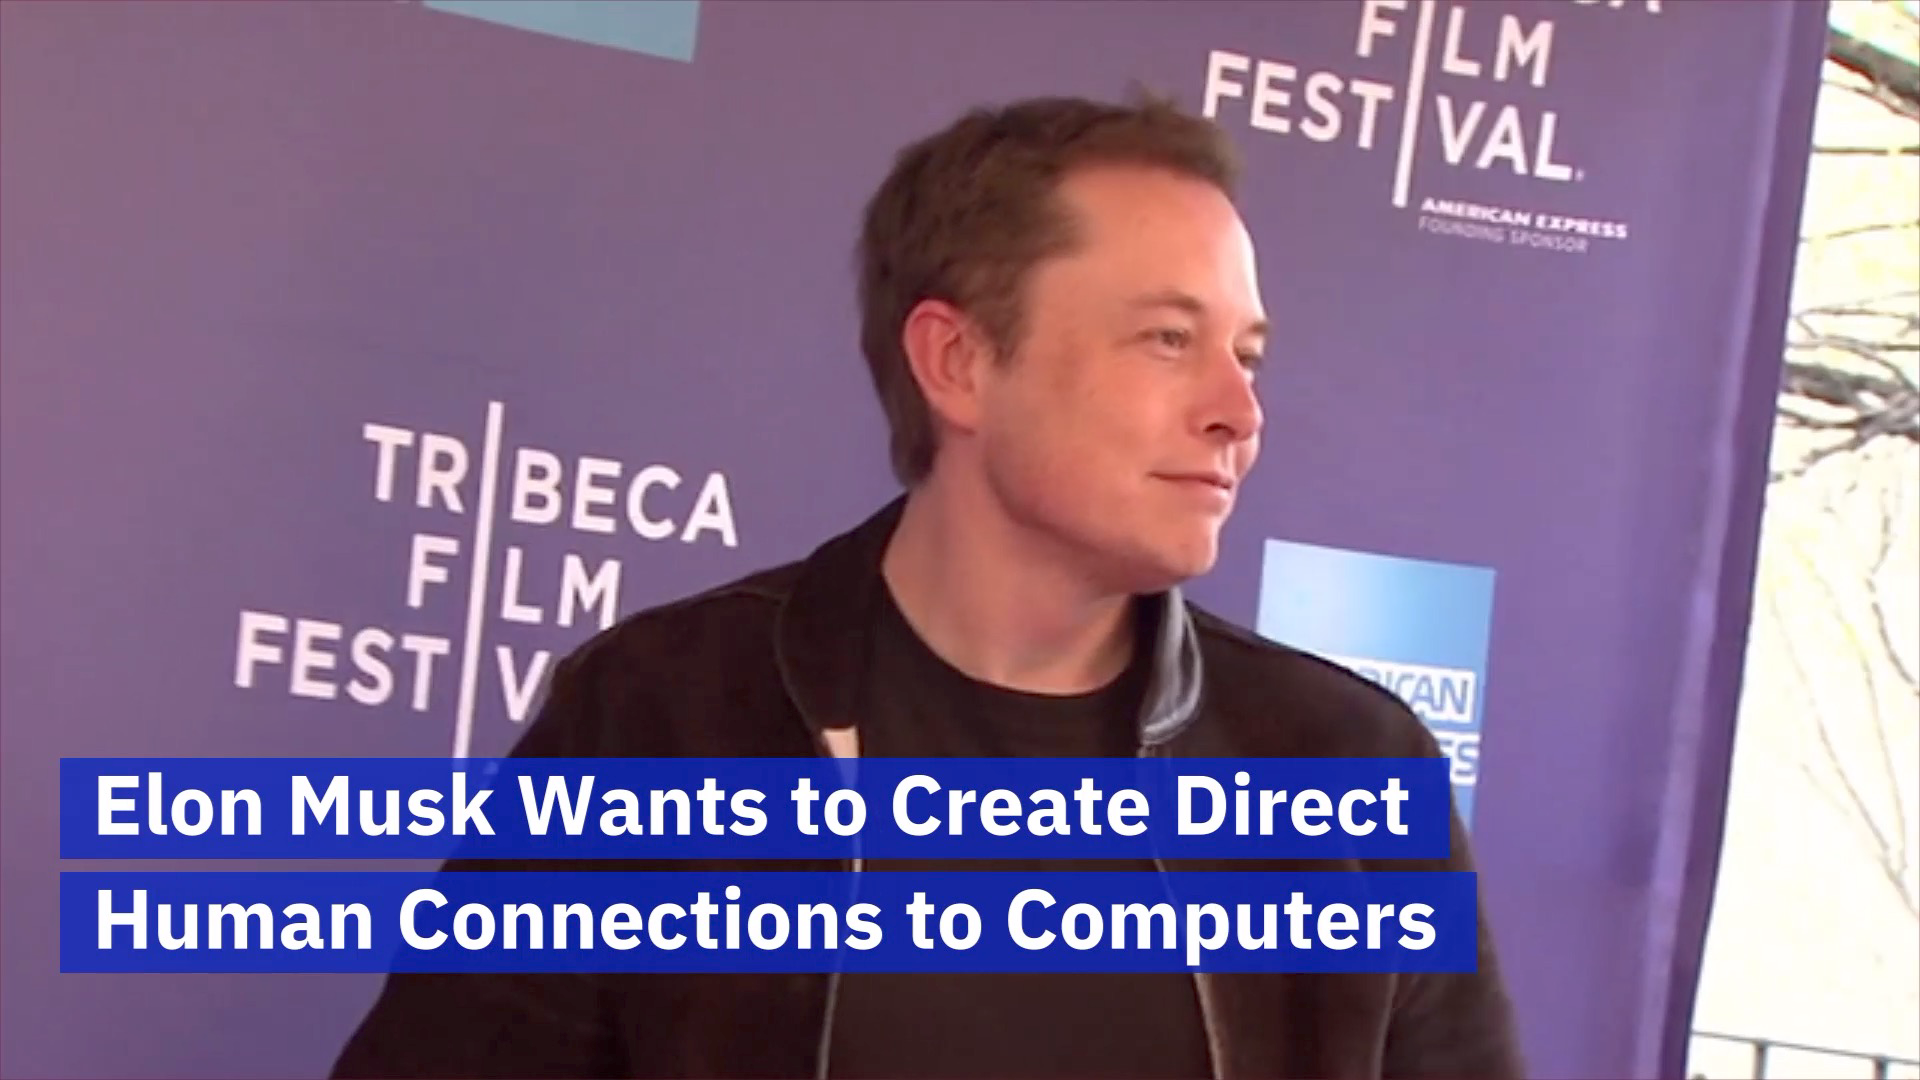 Will You Buy These Elon Musk Brain Chips